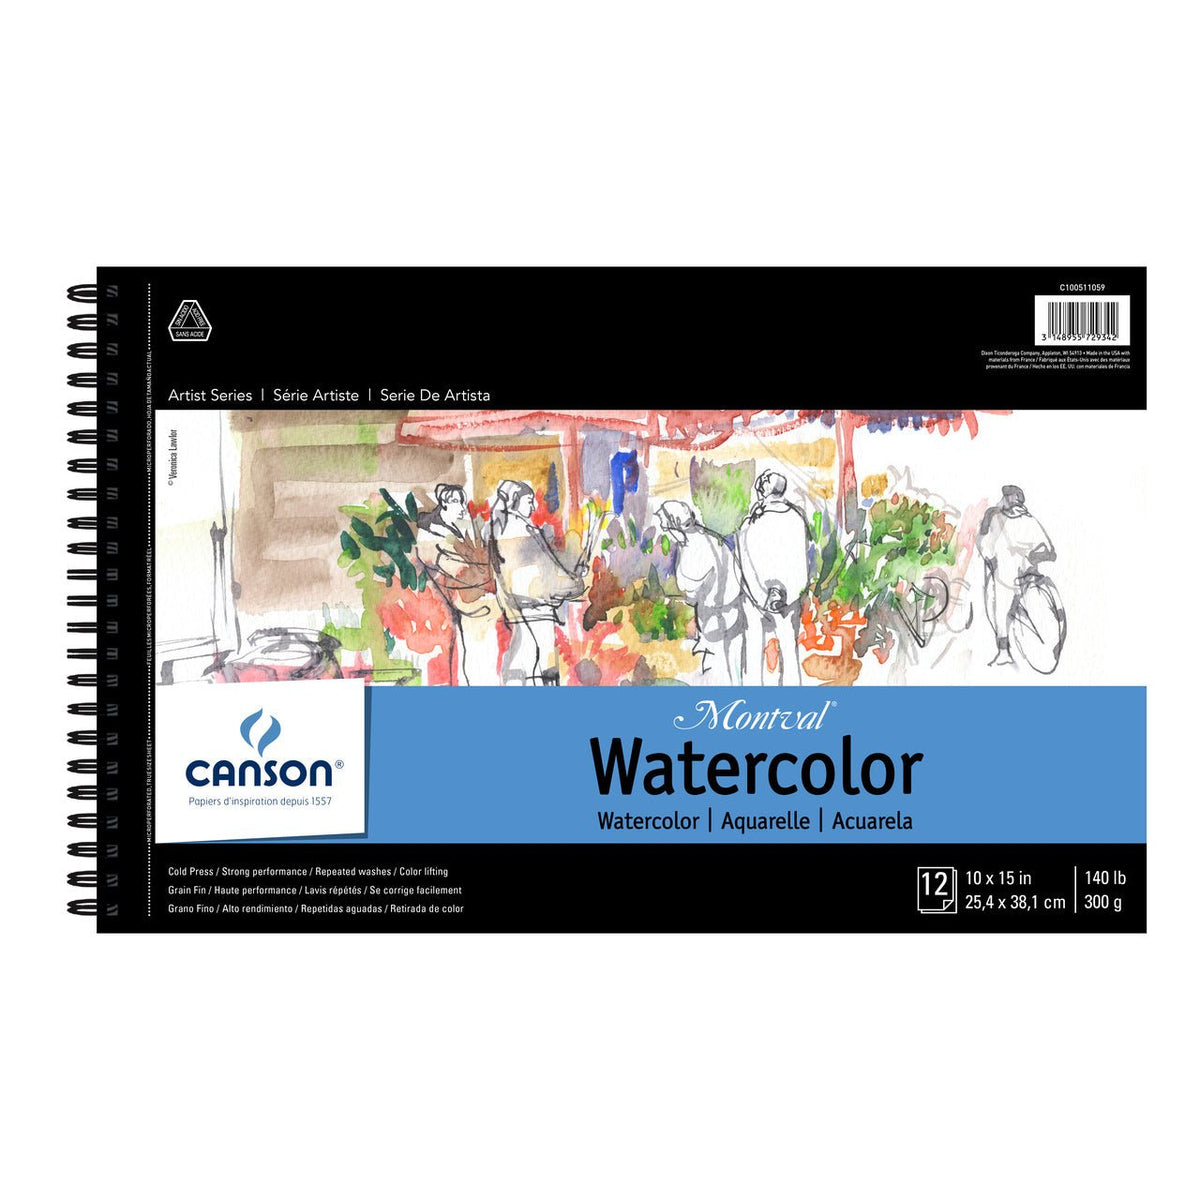 Canson - XL Watercolor Pad - 11 x 15